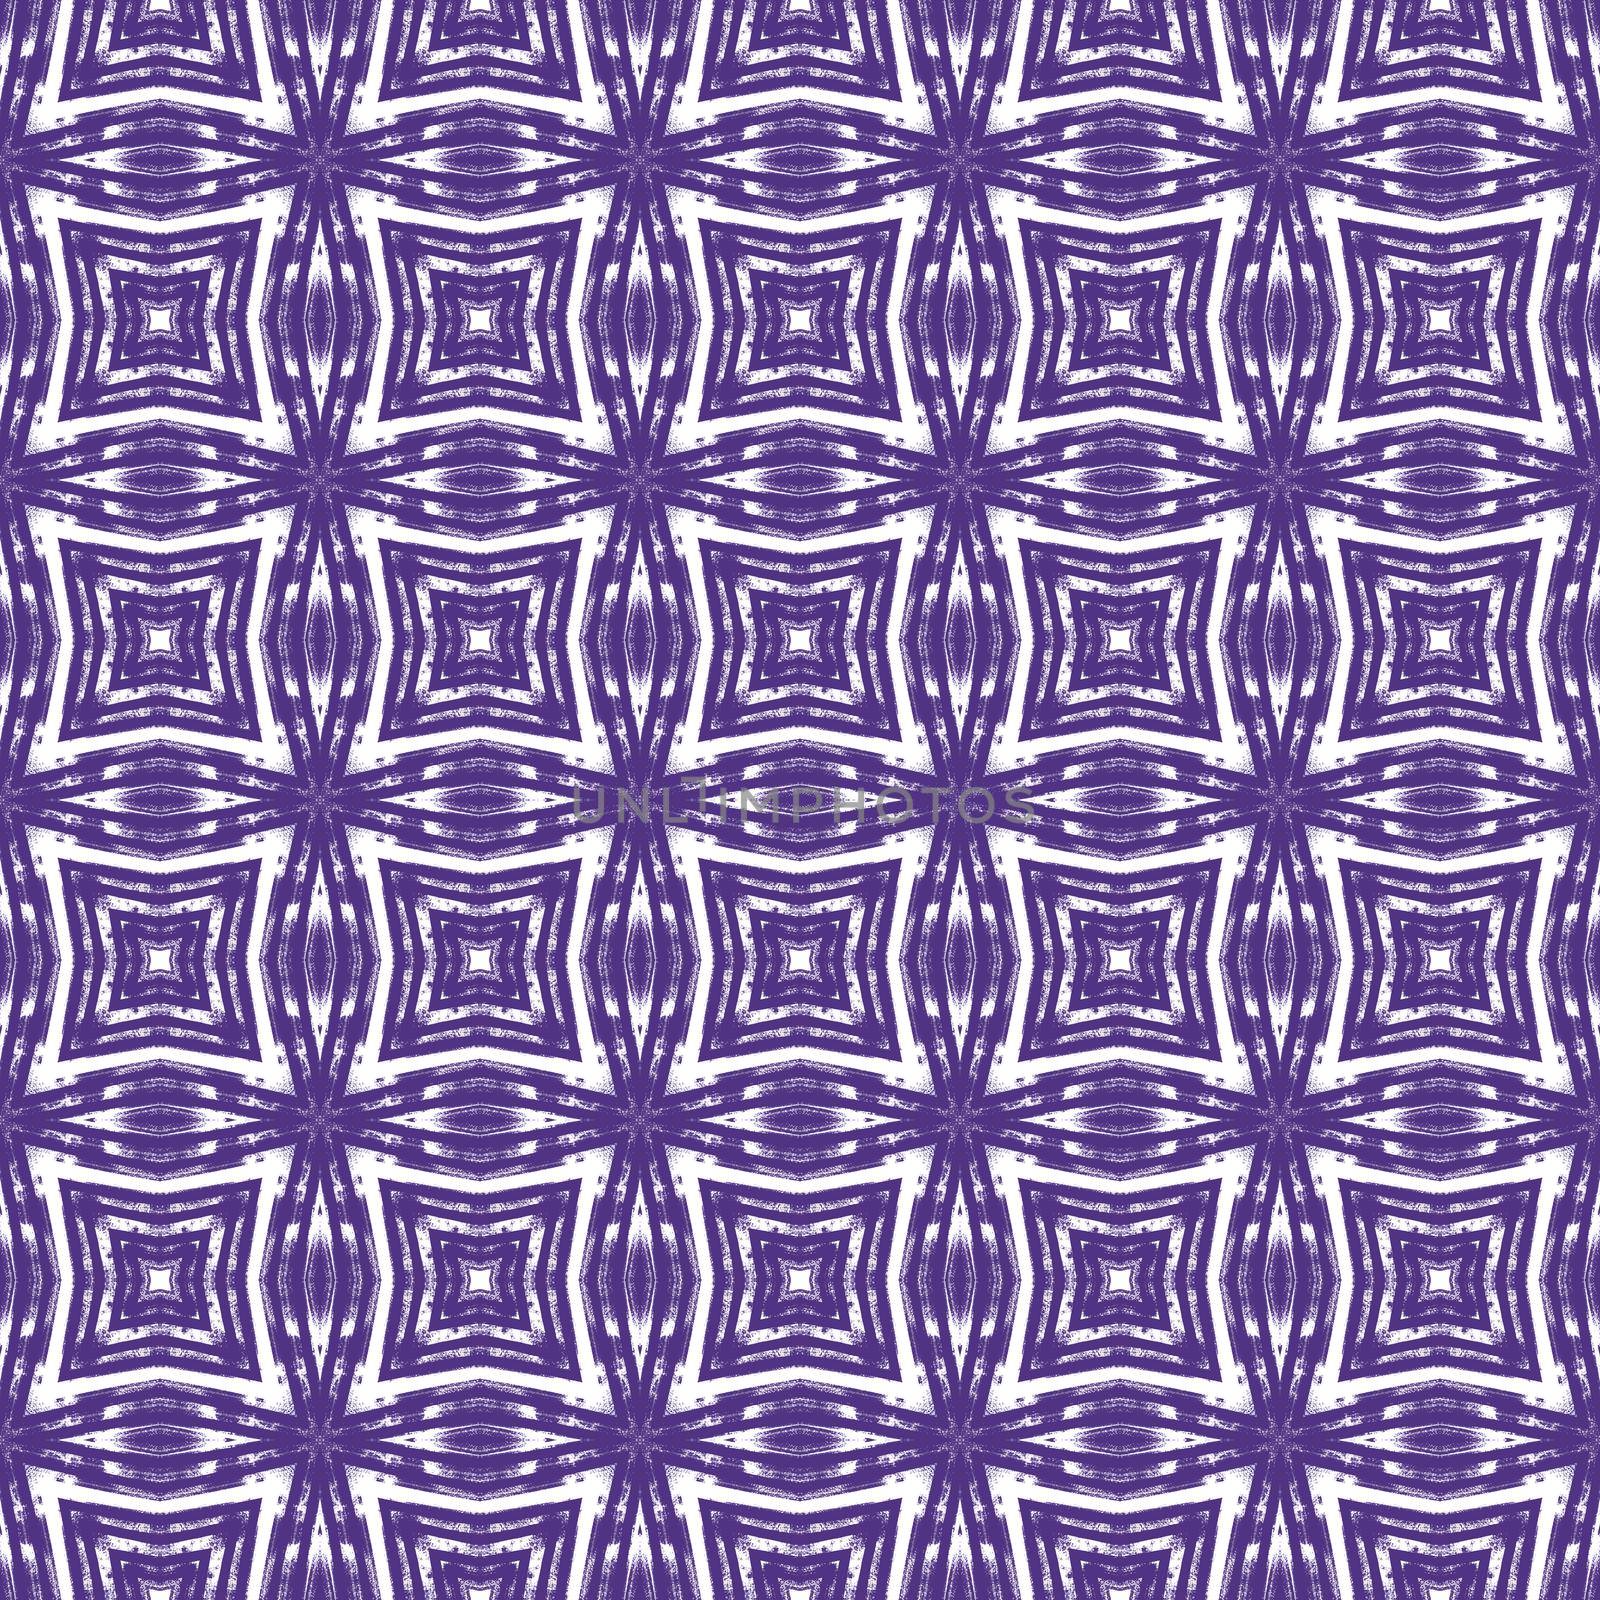 Ethnic hand painted pattern. Purple symmetrical kaleidoscope background. Textile ready rare print, swimwear fabric, wallpaper, wrapping. Summer dress ethnic hand painted tile.